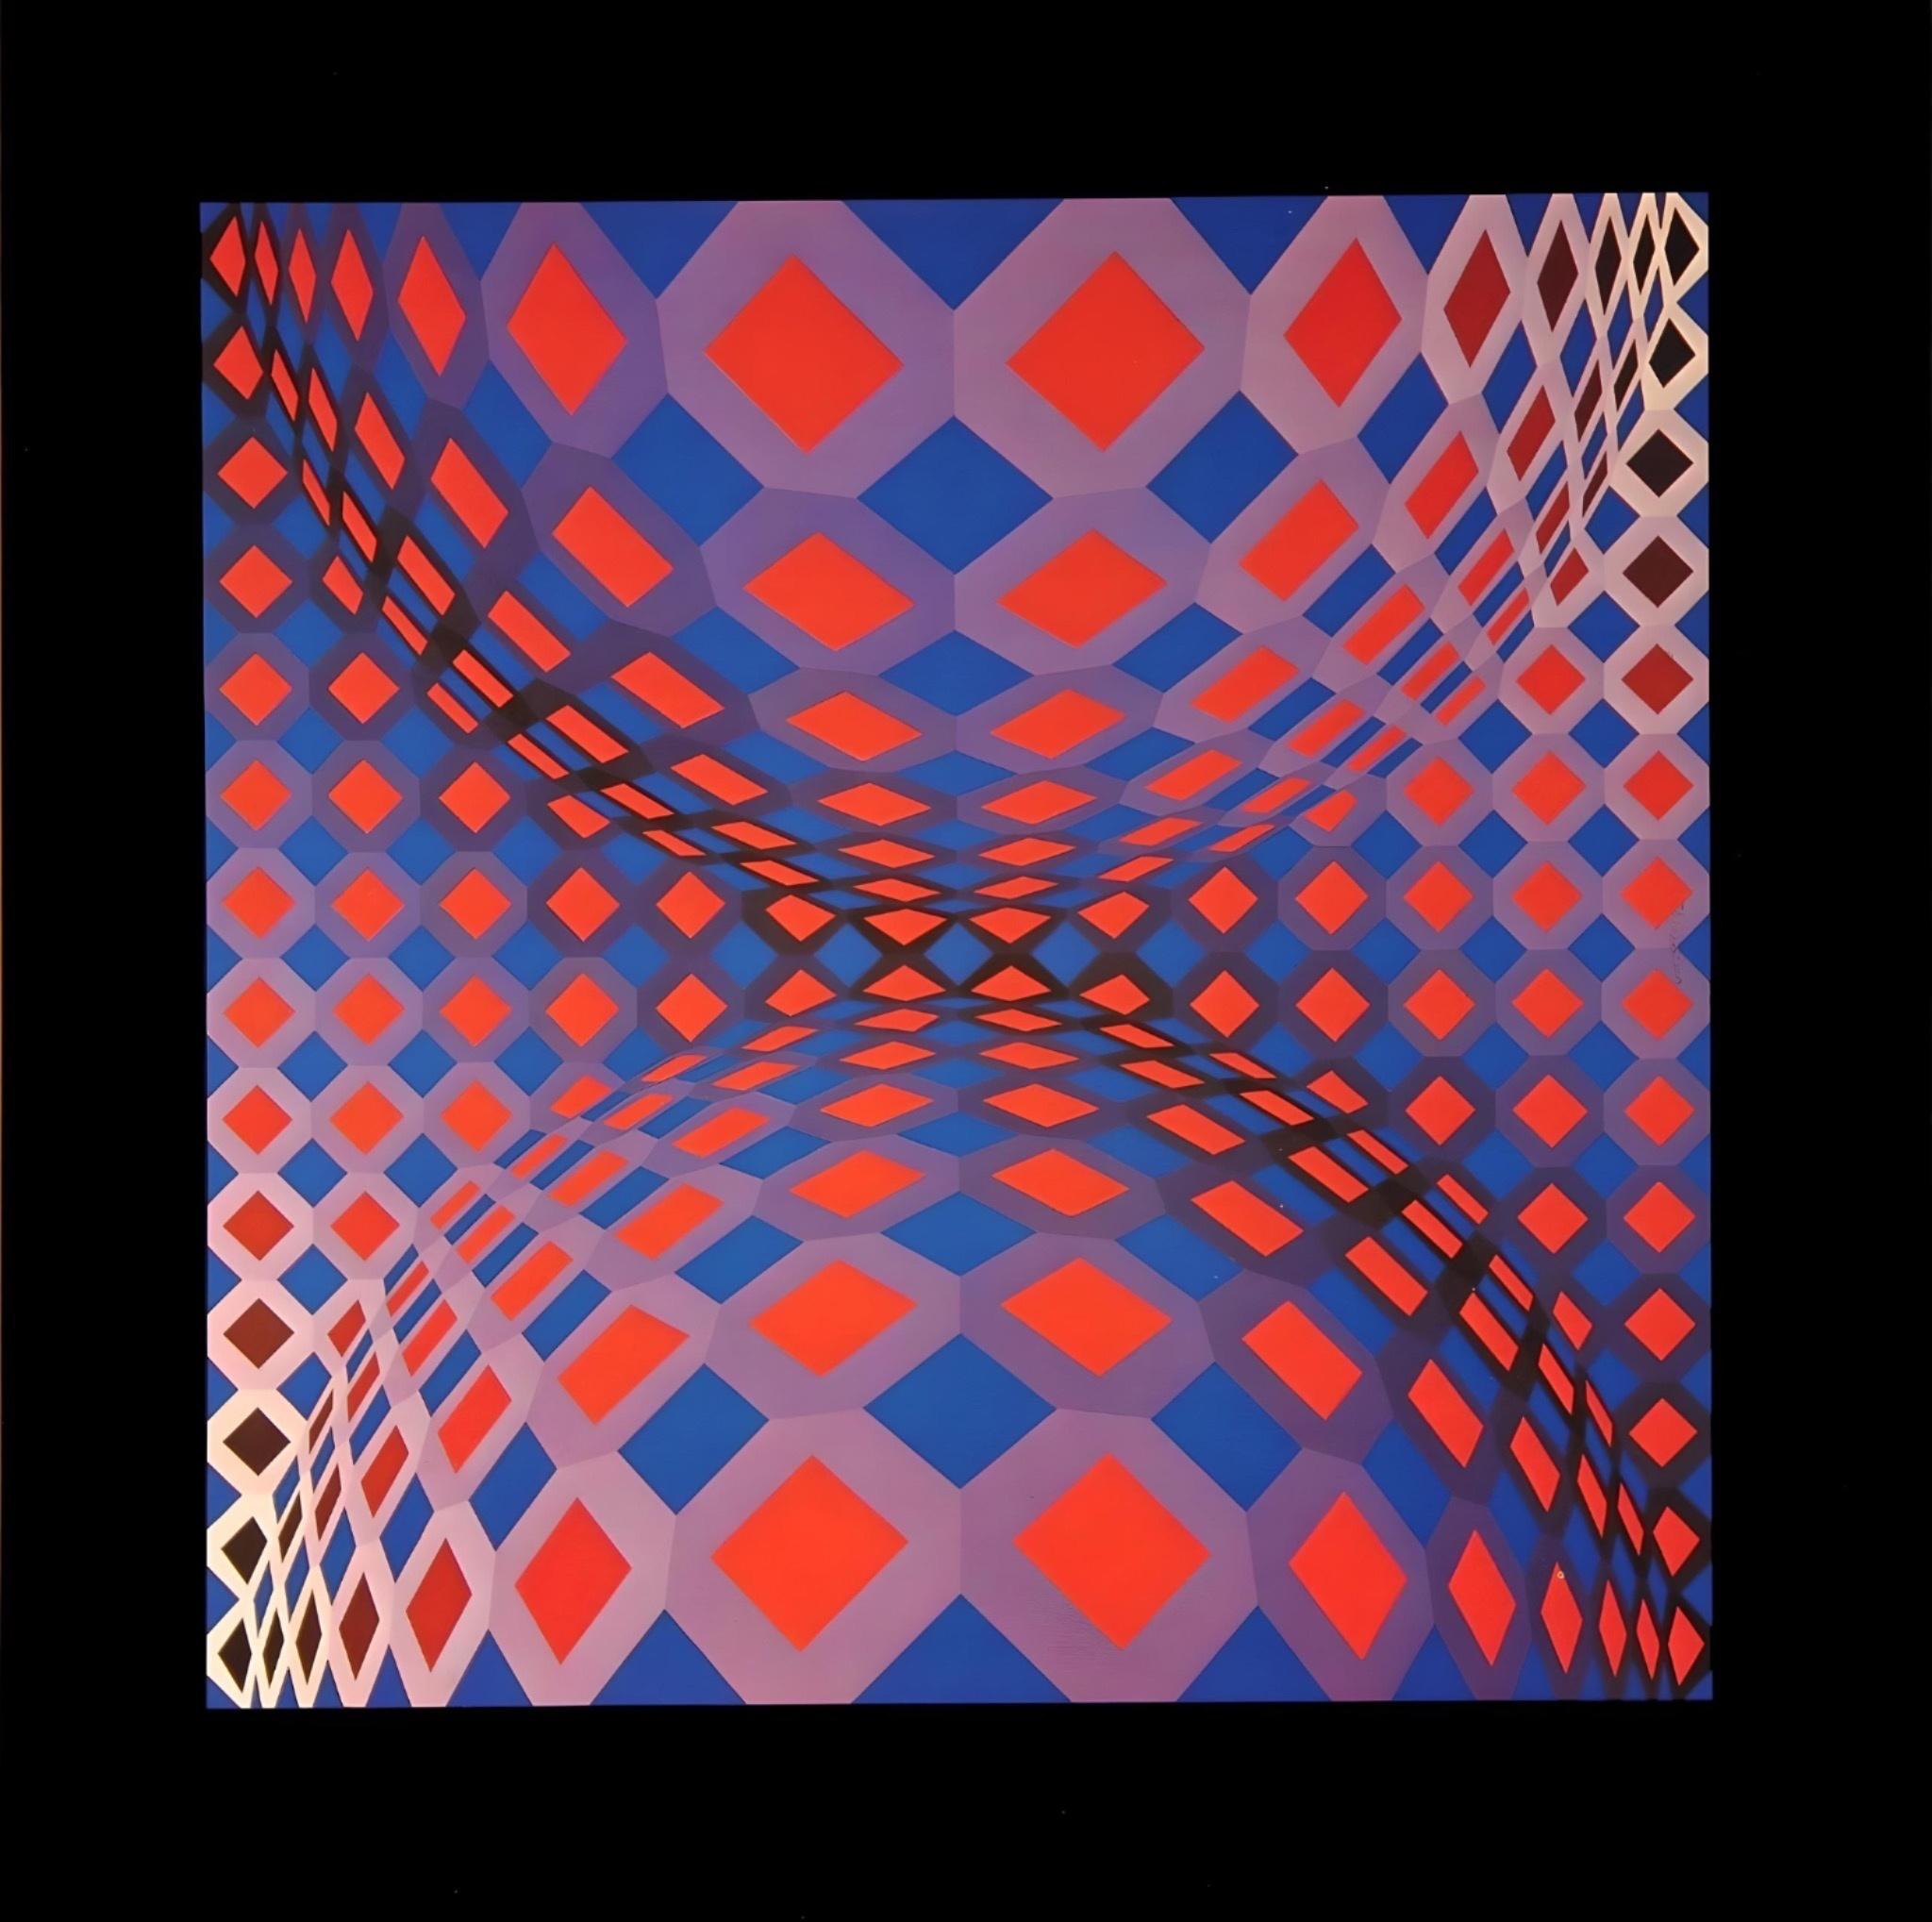 Victor Vasarely Abstract Print - Vasarely, Composition, Structures universelles de l'Octogone (after)